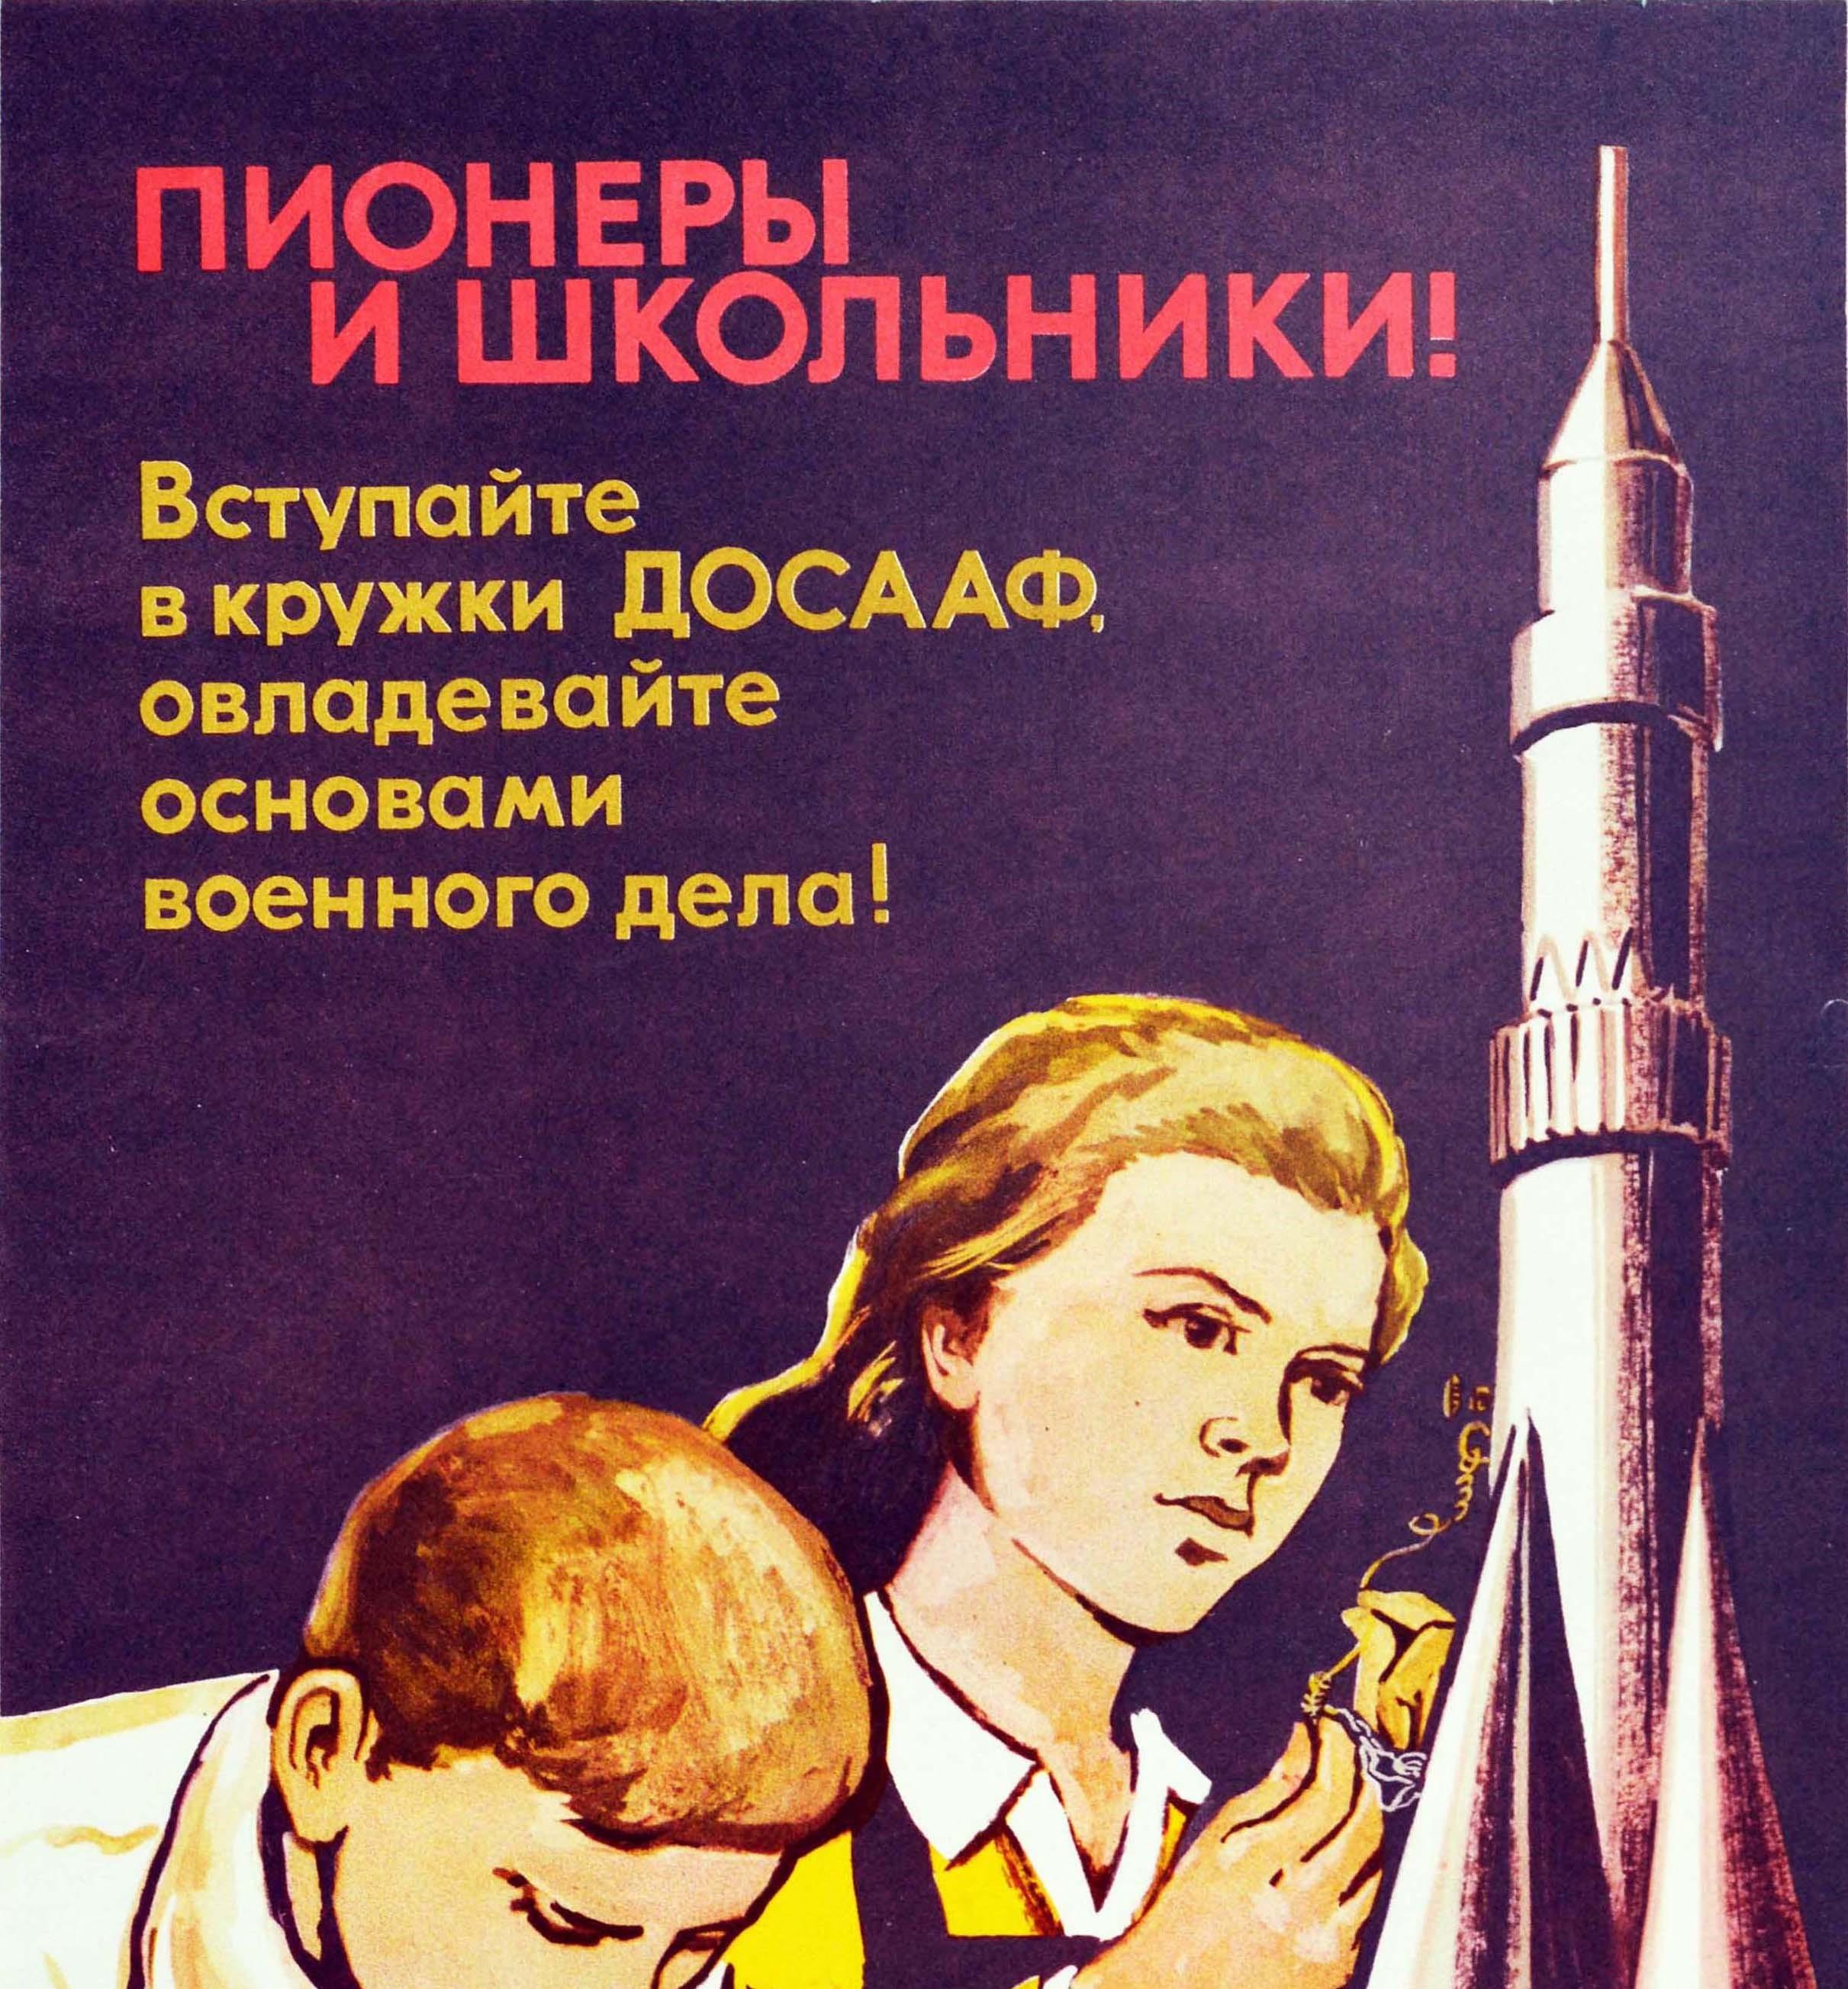 Original vintage Soviet propaganda poster - ??????? ? ?????????! ????????? ? ?????? ??????, ??????????? ???????? ???????? ????! ?????????? ? ????????? ????? ? ??????? ??????! / Pioneers and schoolchildren! Join the DOSAAF sections, master the basics